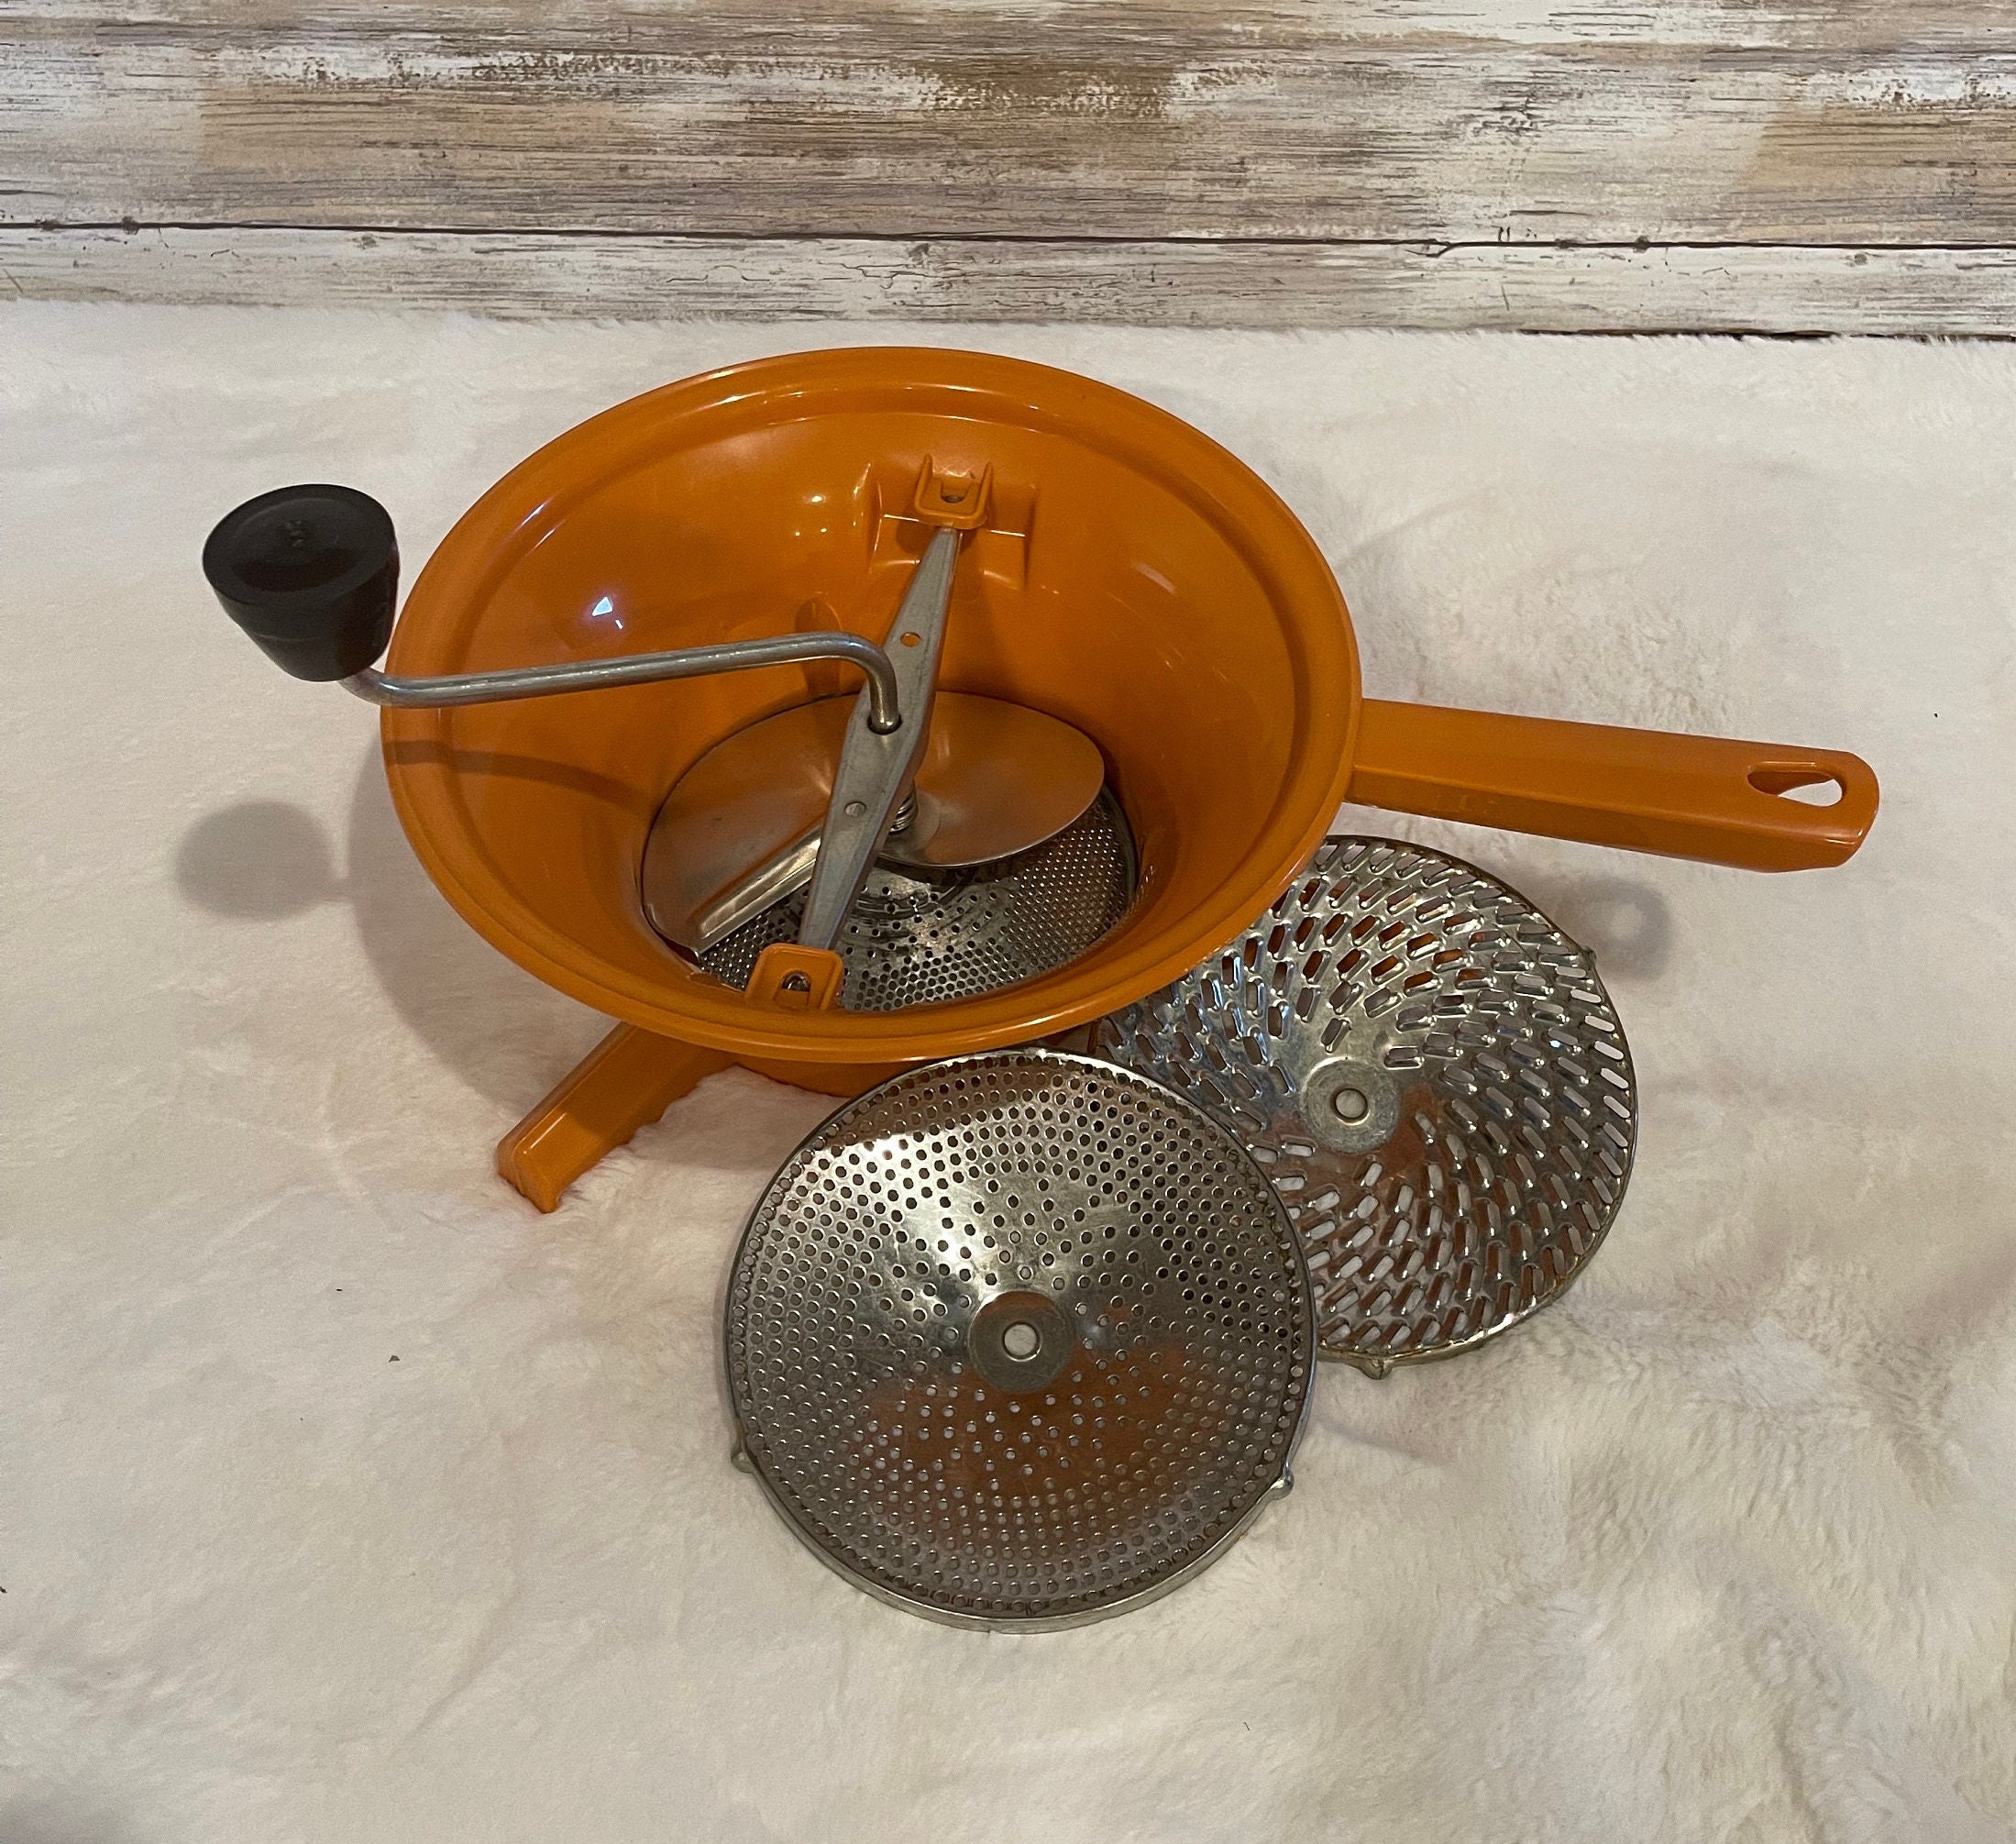 Moulin Legumes No.2, Food Mill, Made in France by Moulinex,three Blades  Metal Orange Plastic, Vintage 1970's -  India